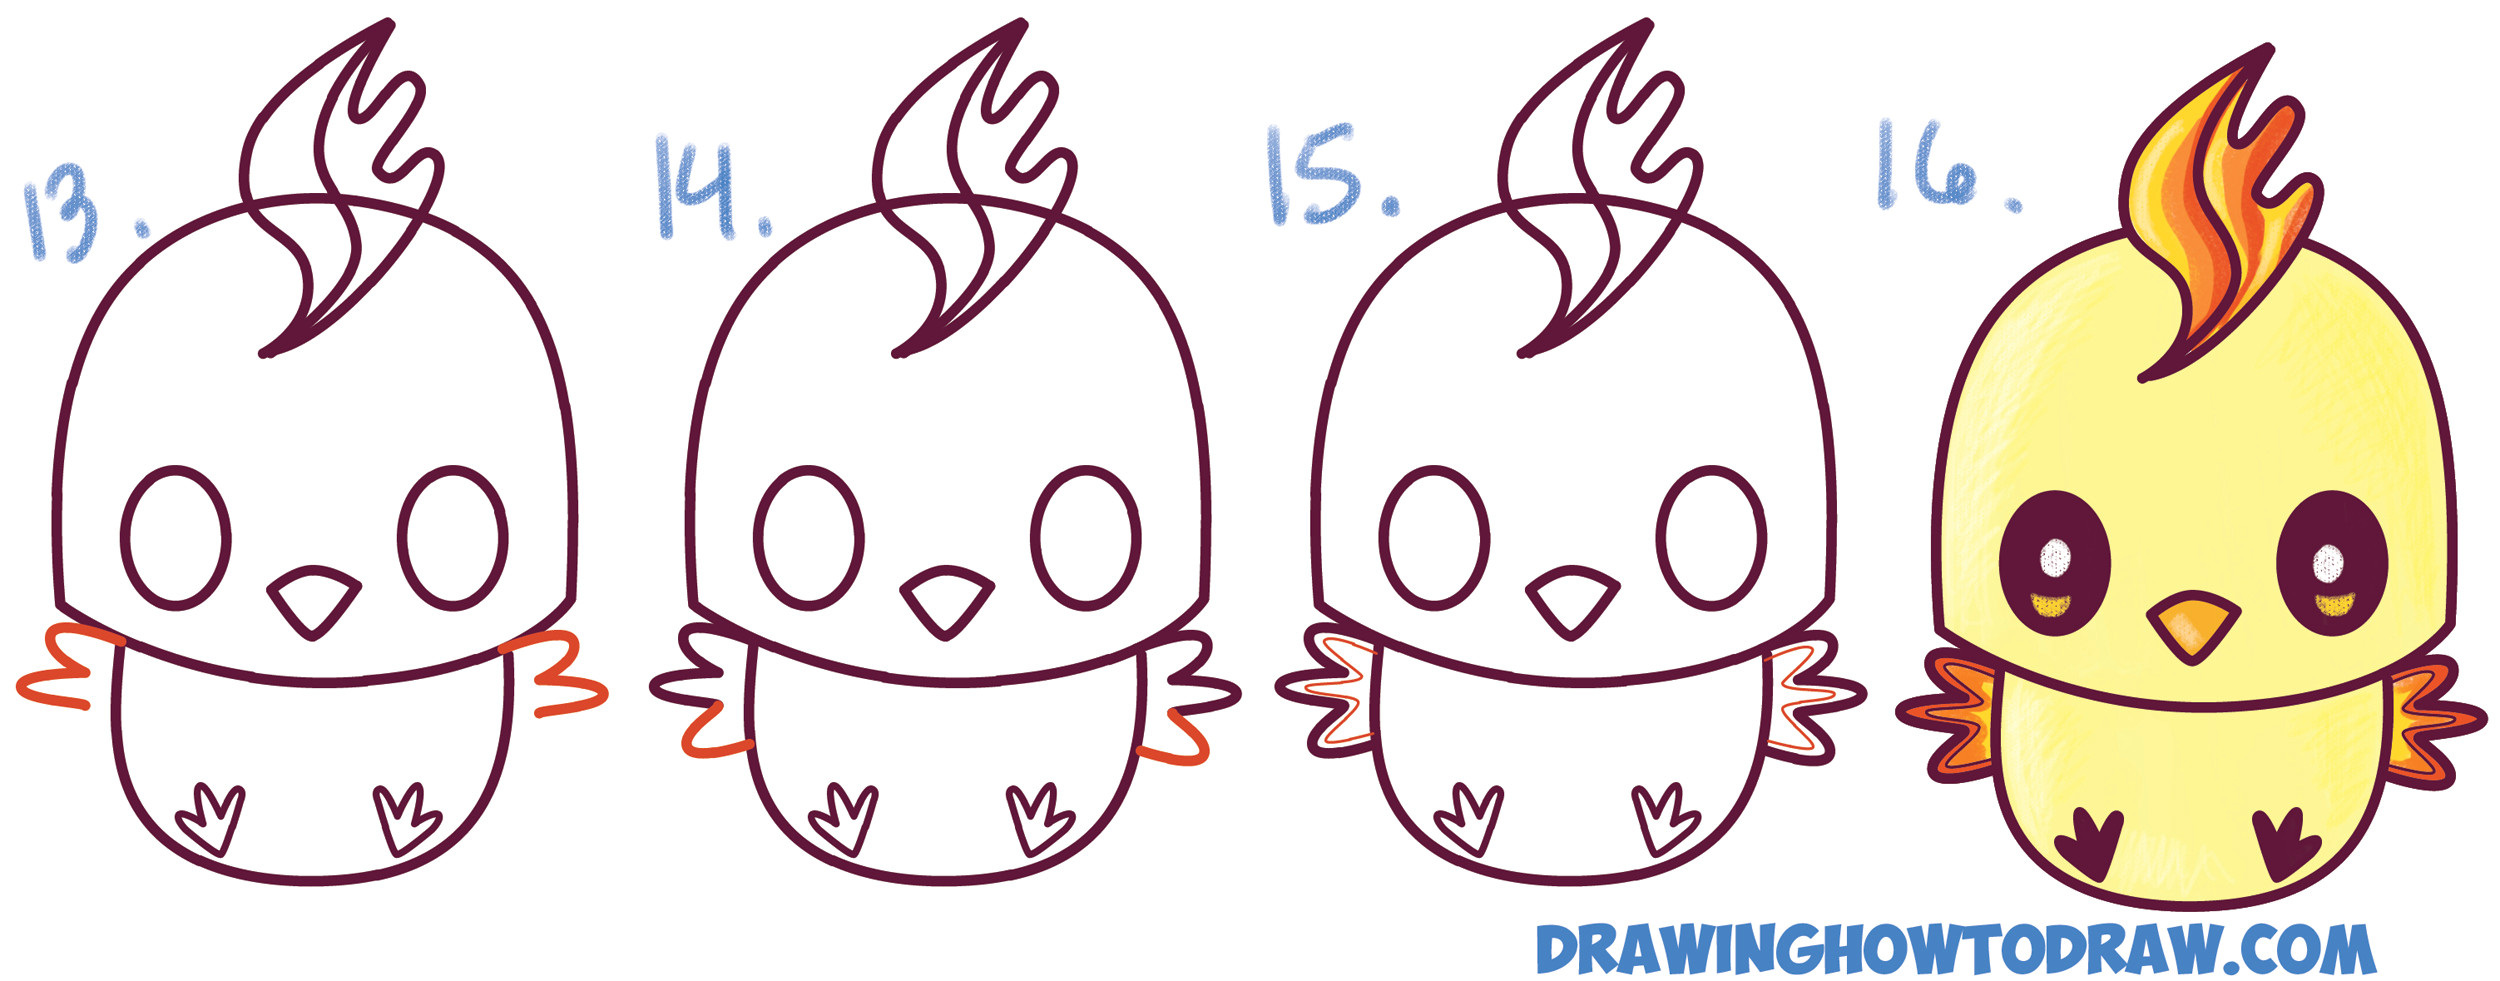 Drawing Cute Pokemon as Monsters How to Draw Cute Kawaii Chibi Moltres From Pokemon In Easy Step